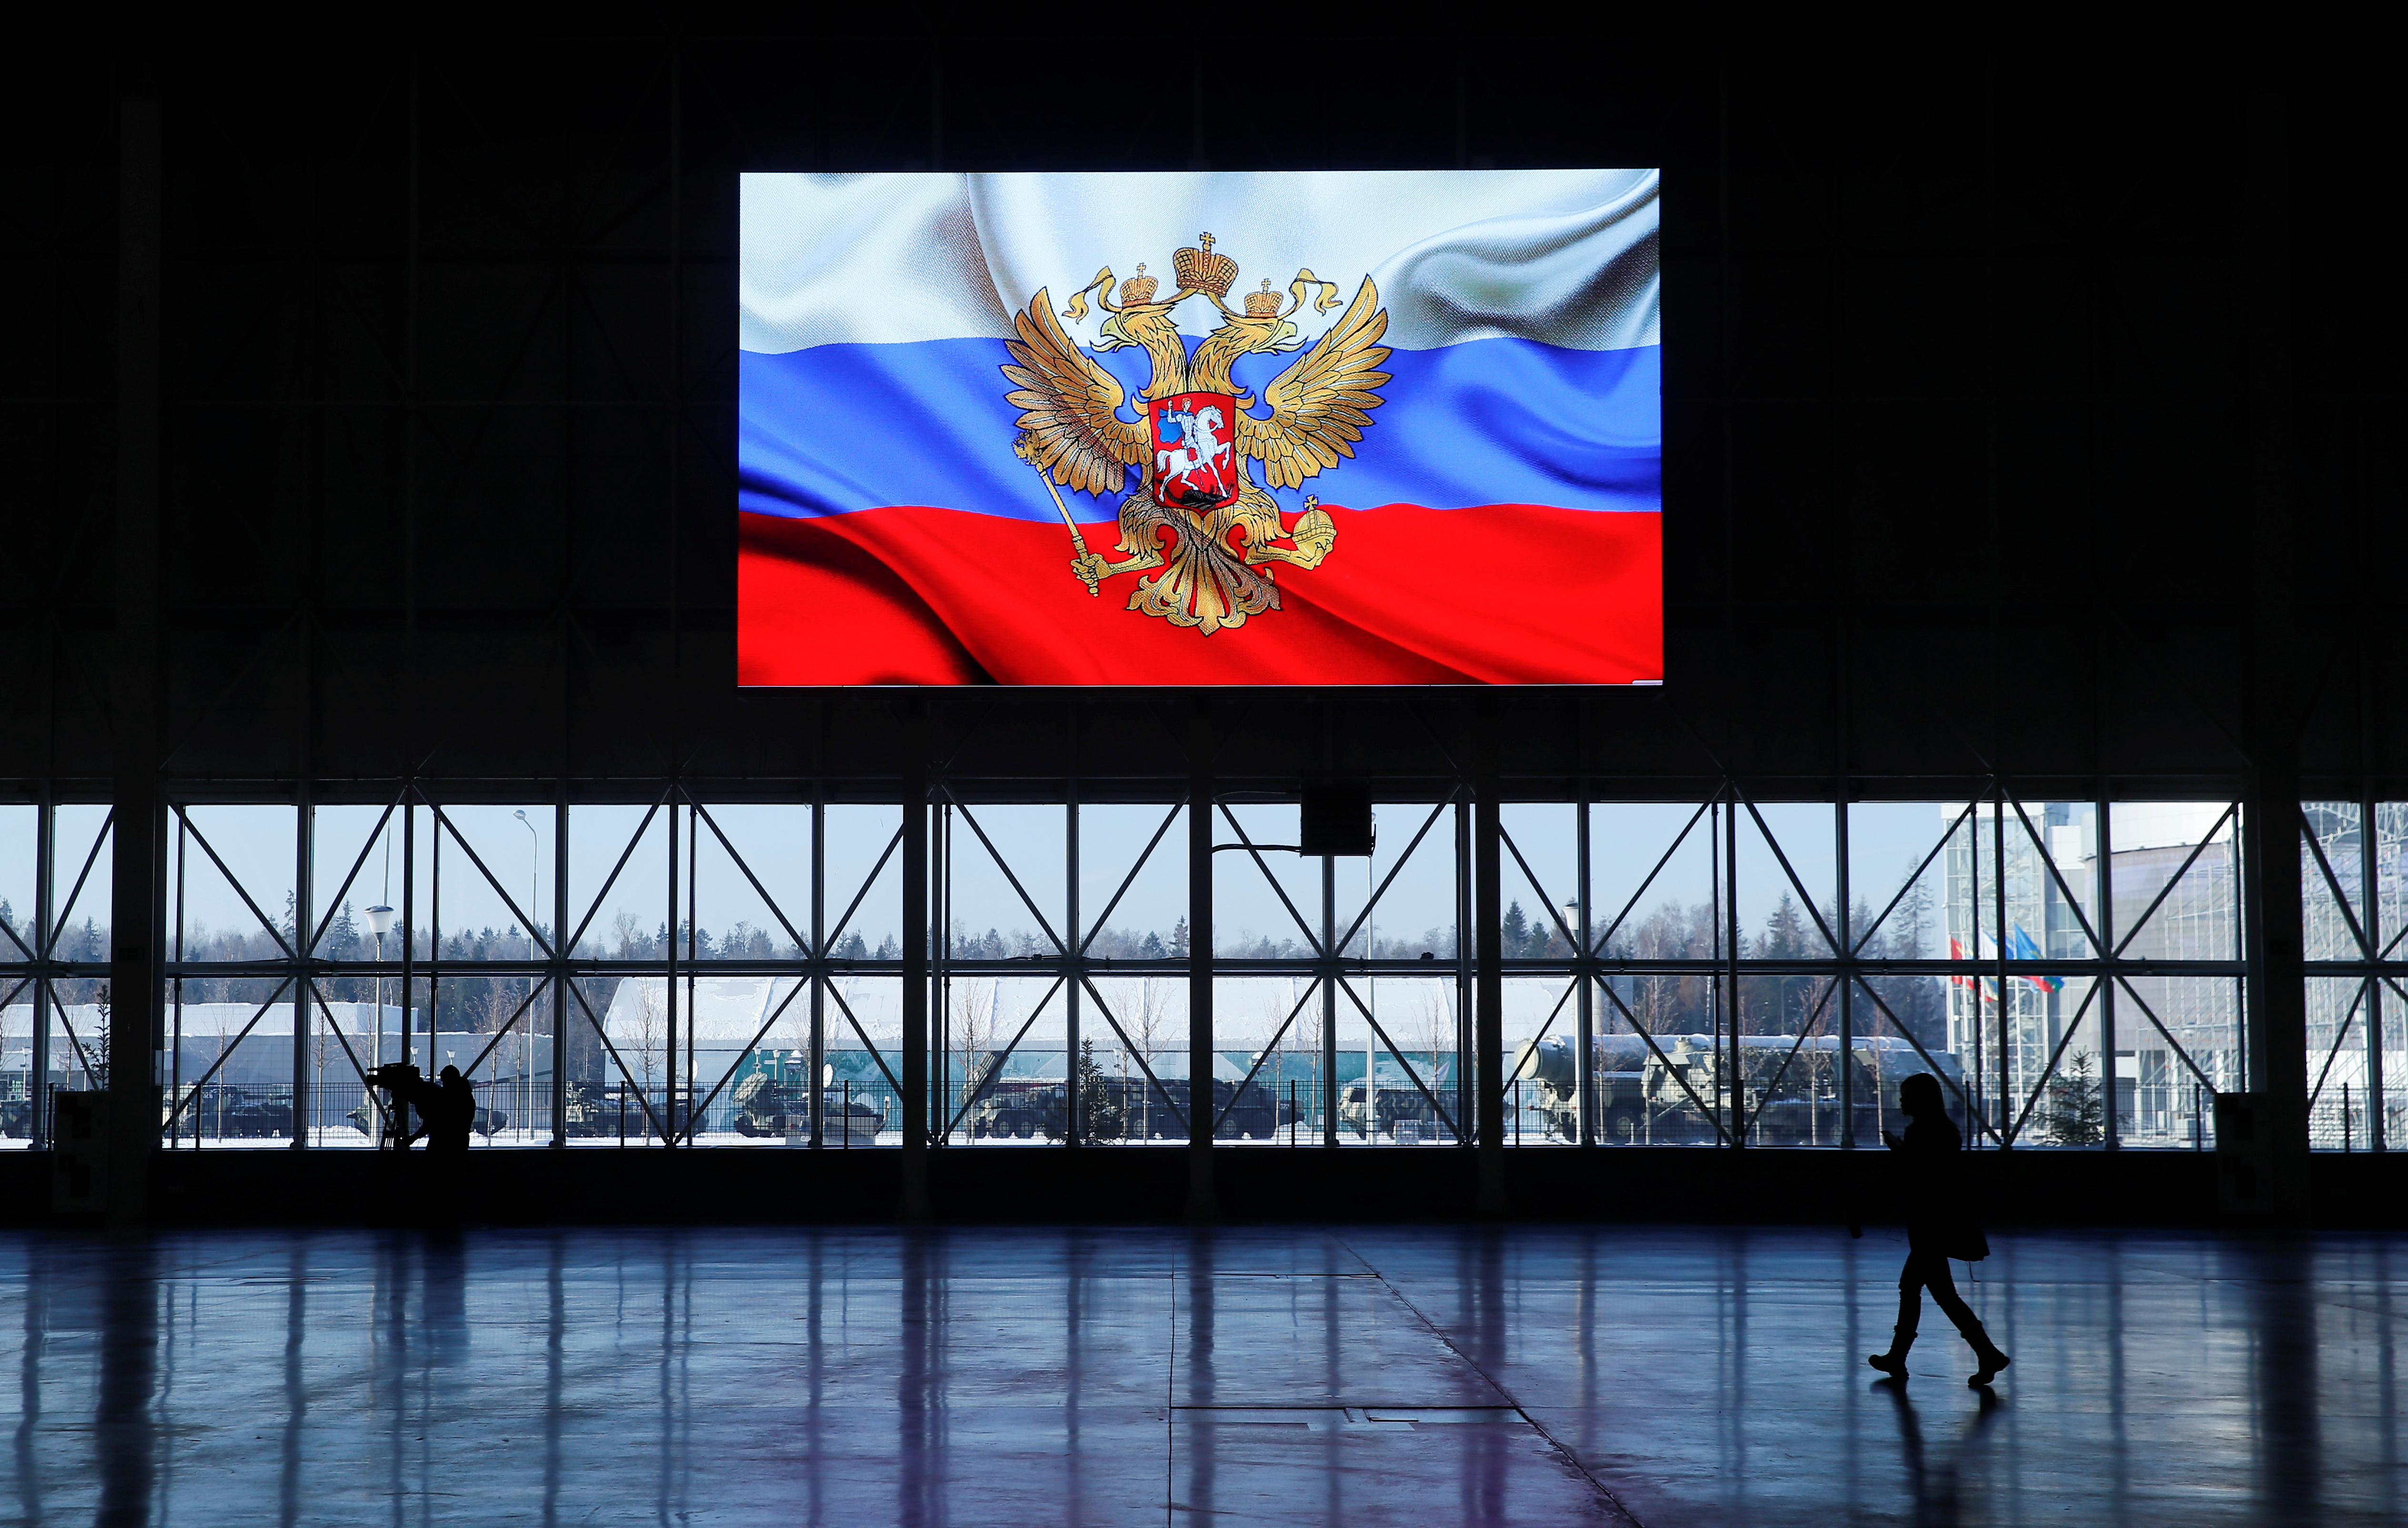 A view shows a screen displaying a flag with the Russian coat of arms during a news briefing near Moscow